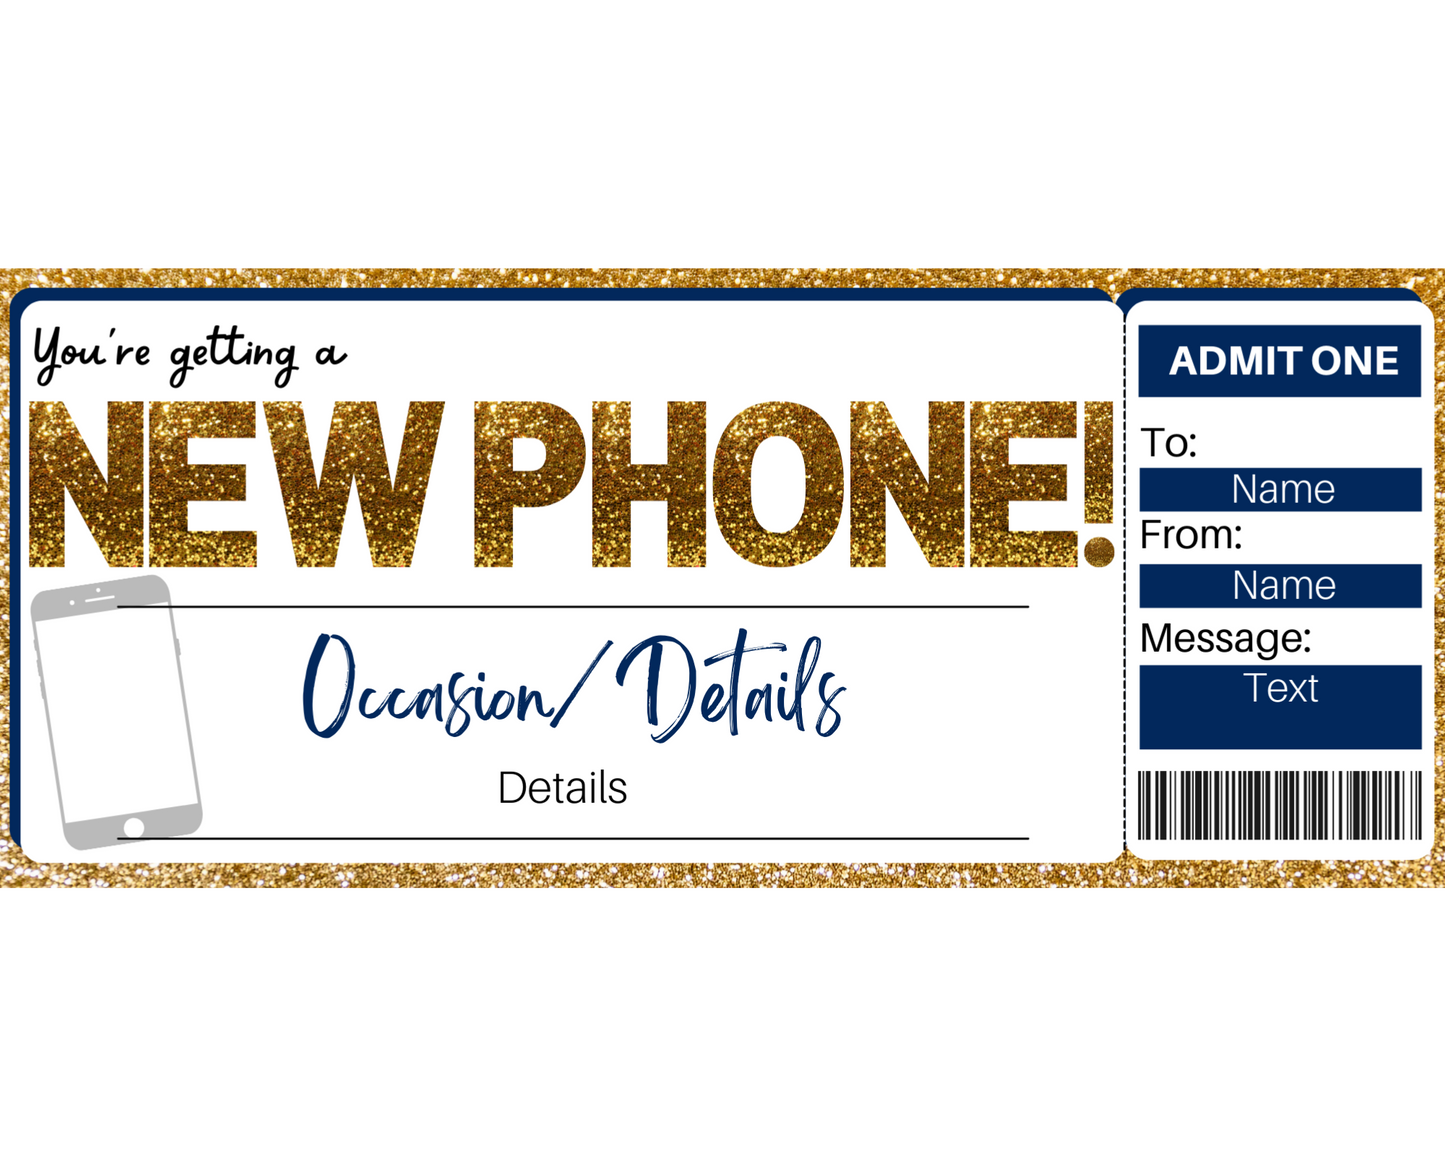 New Phone Gift Certificate Template